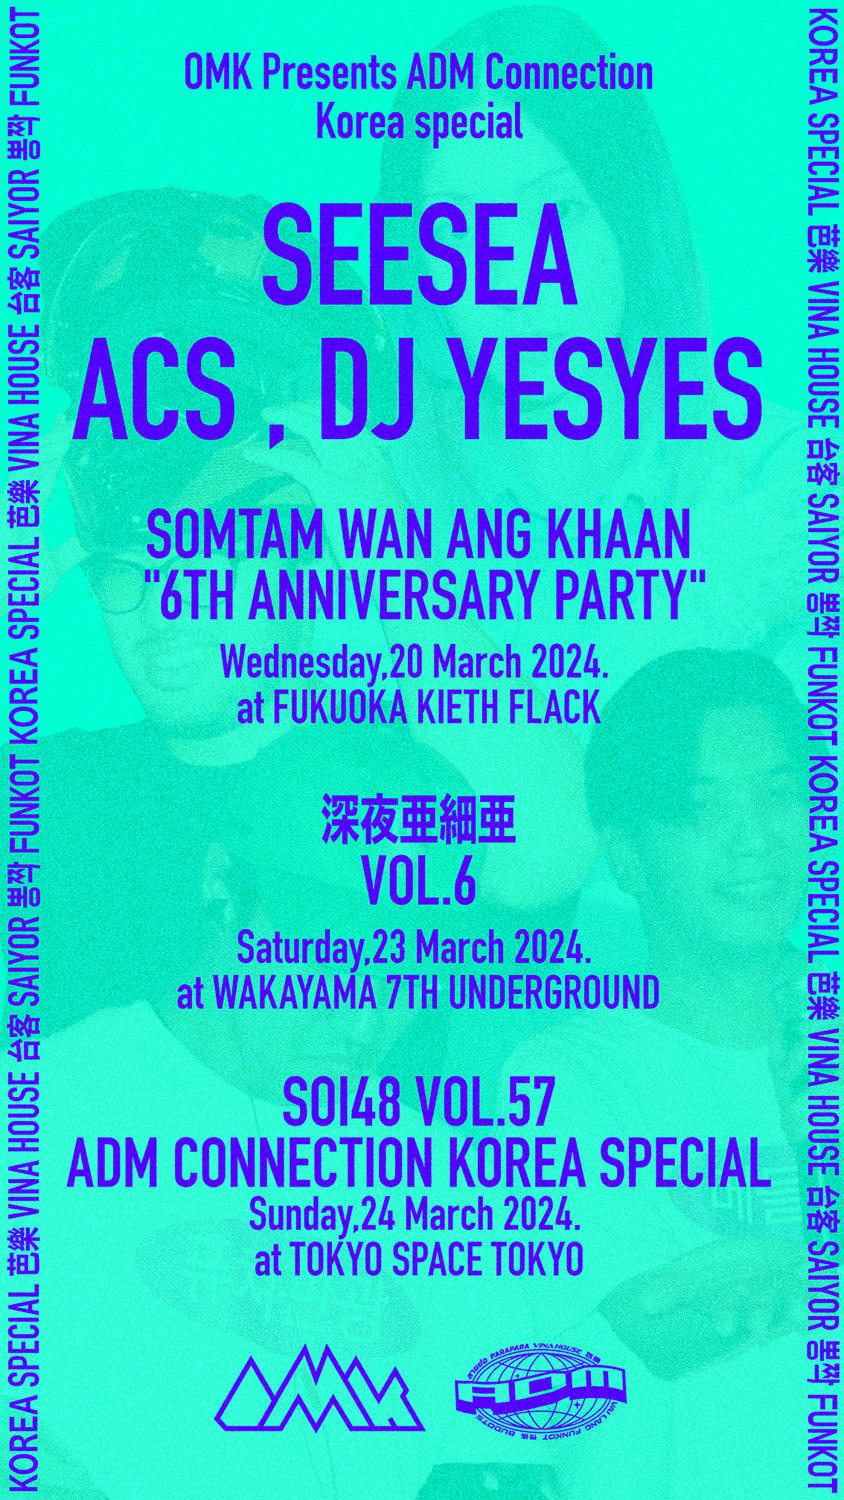 OMK Presents ADM Connection -Korea special- Guest: SEESEA / ACS / DJ YESYES